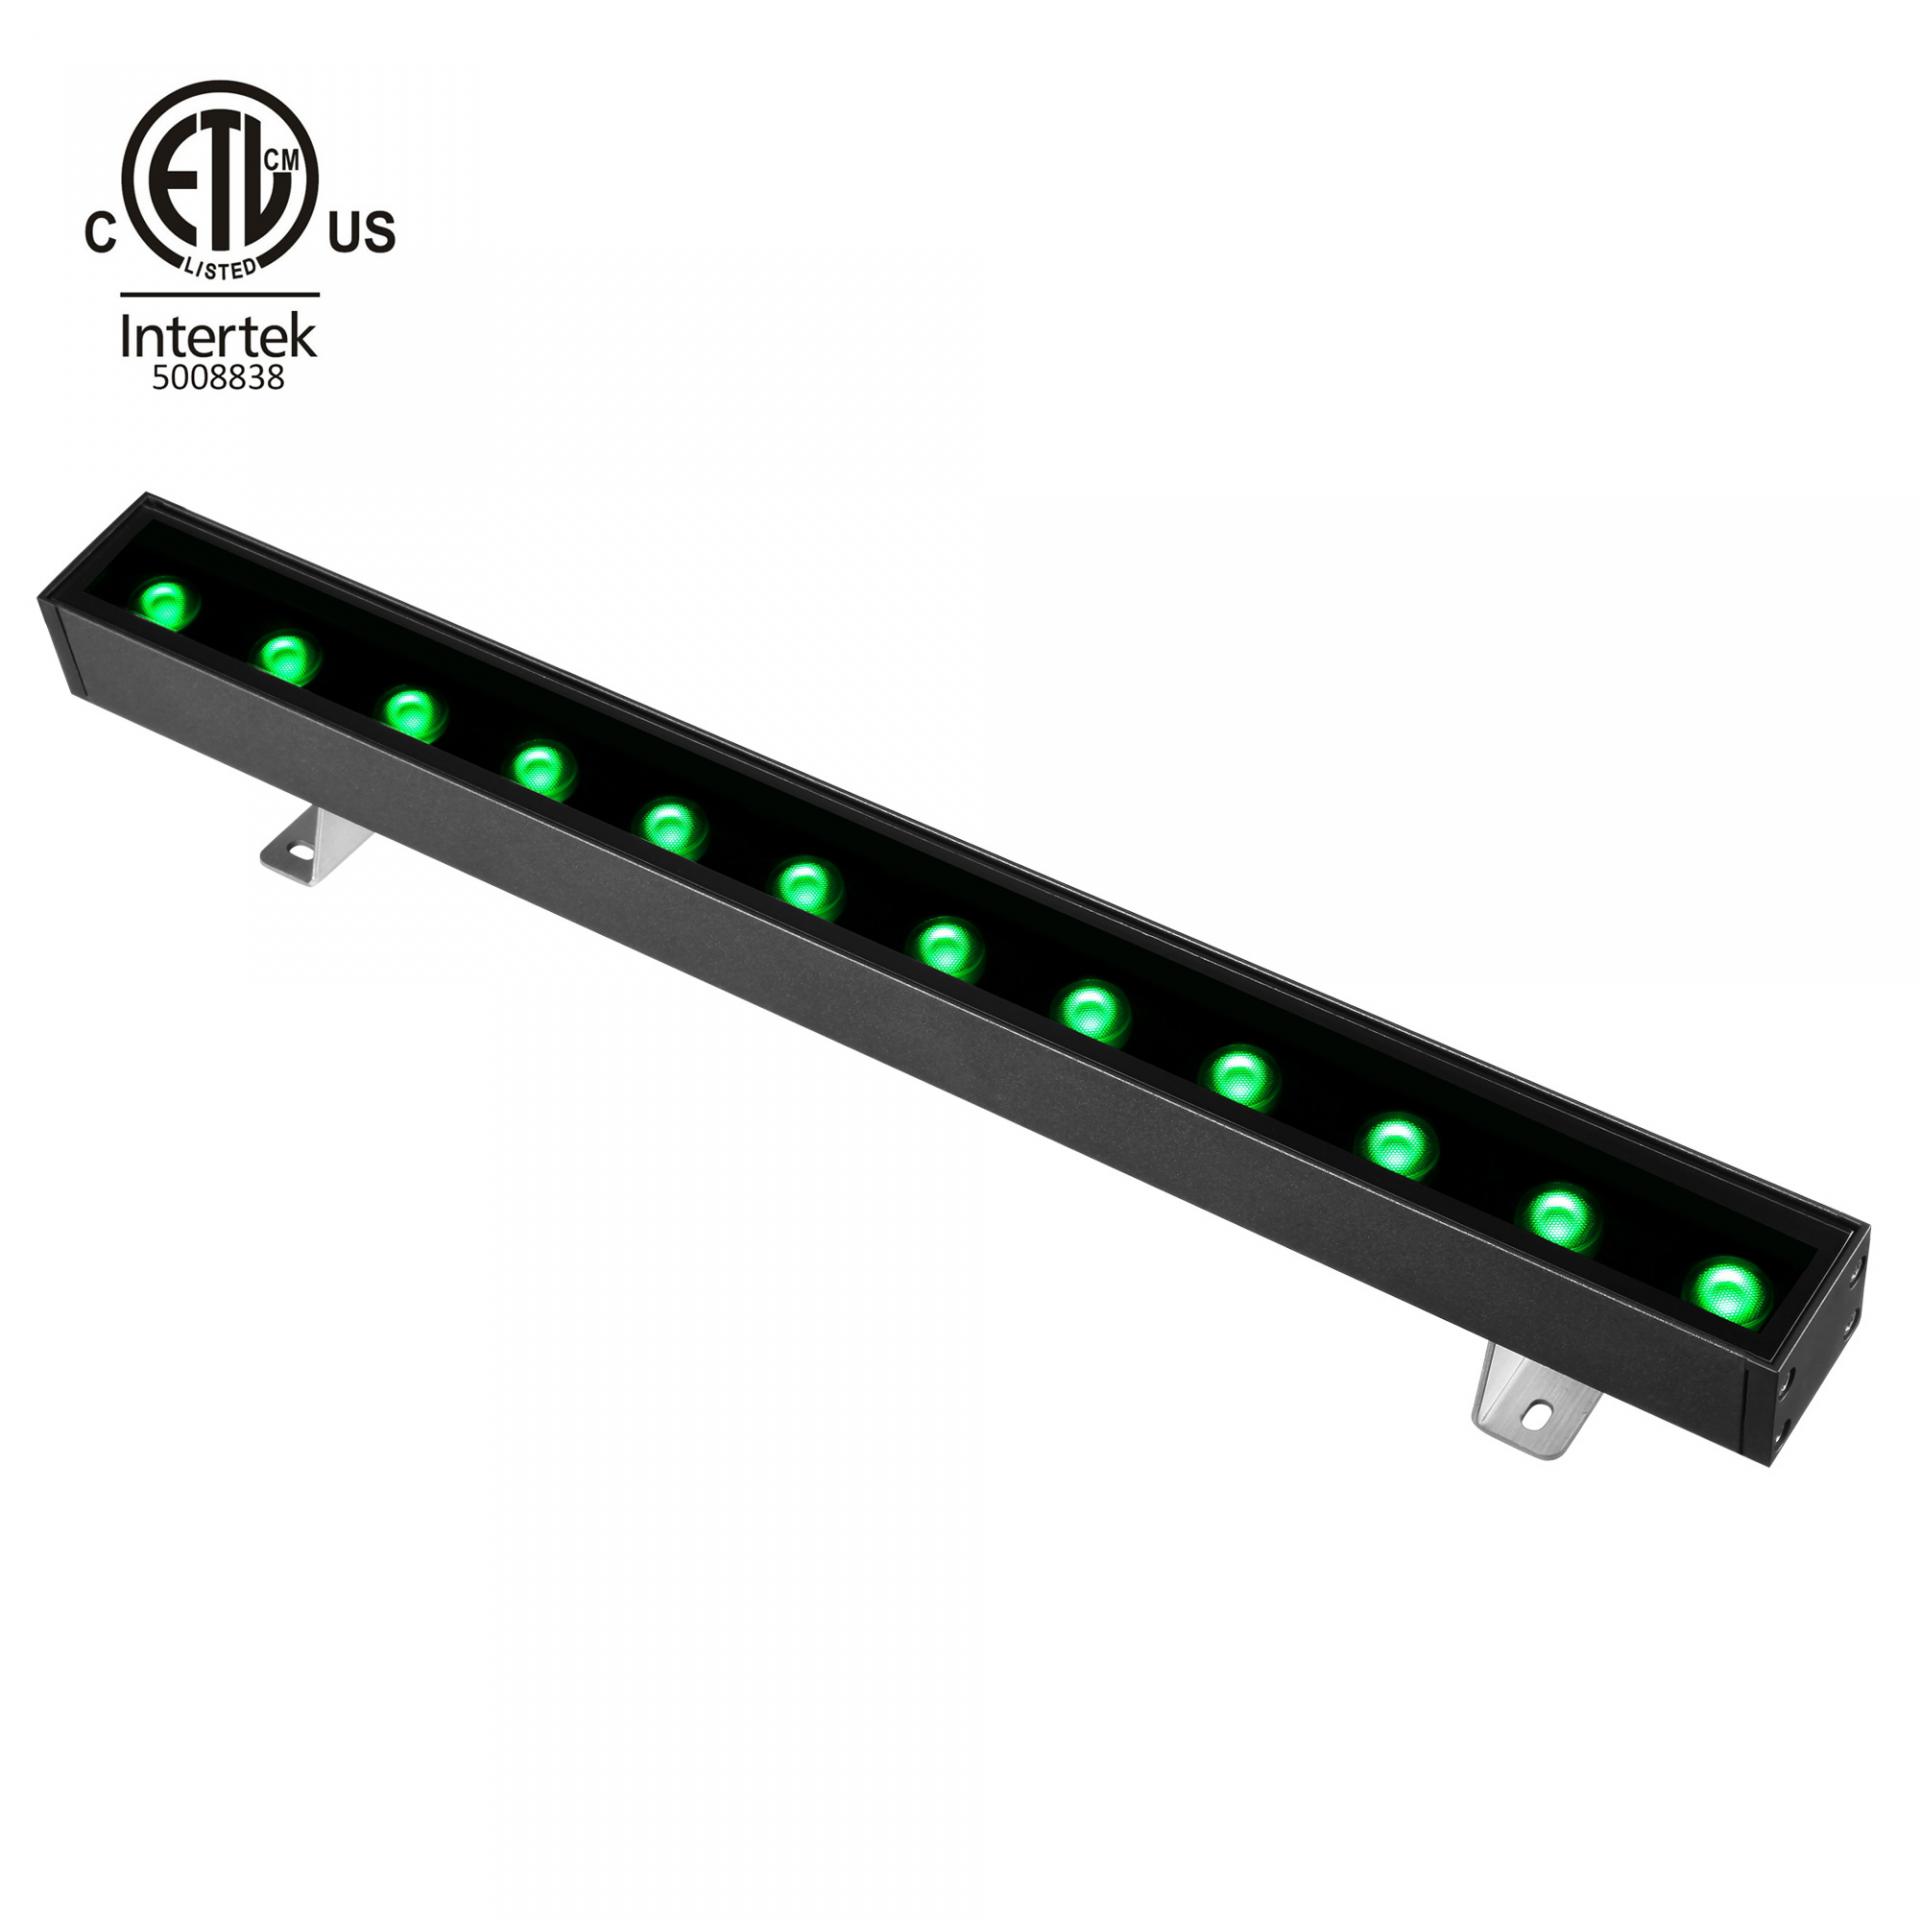 UL ETL Listed 20 inches 50cm lenght 25W RGB RGBW LED Wall Washer